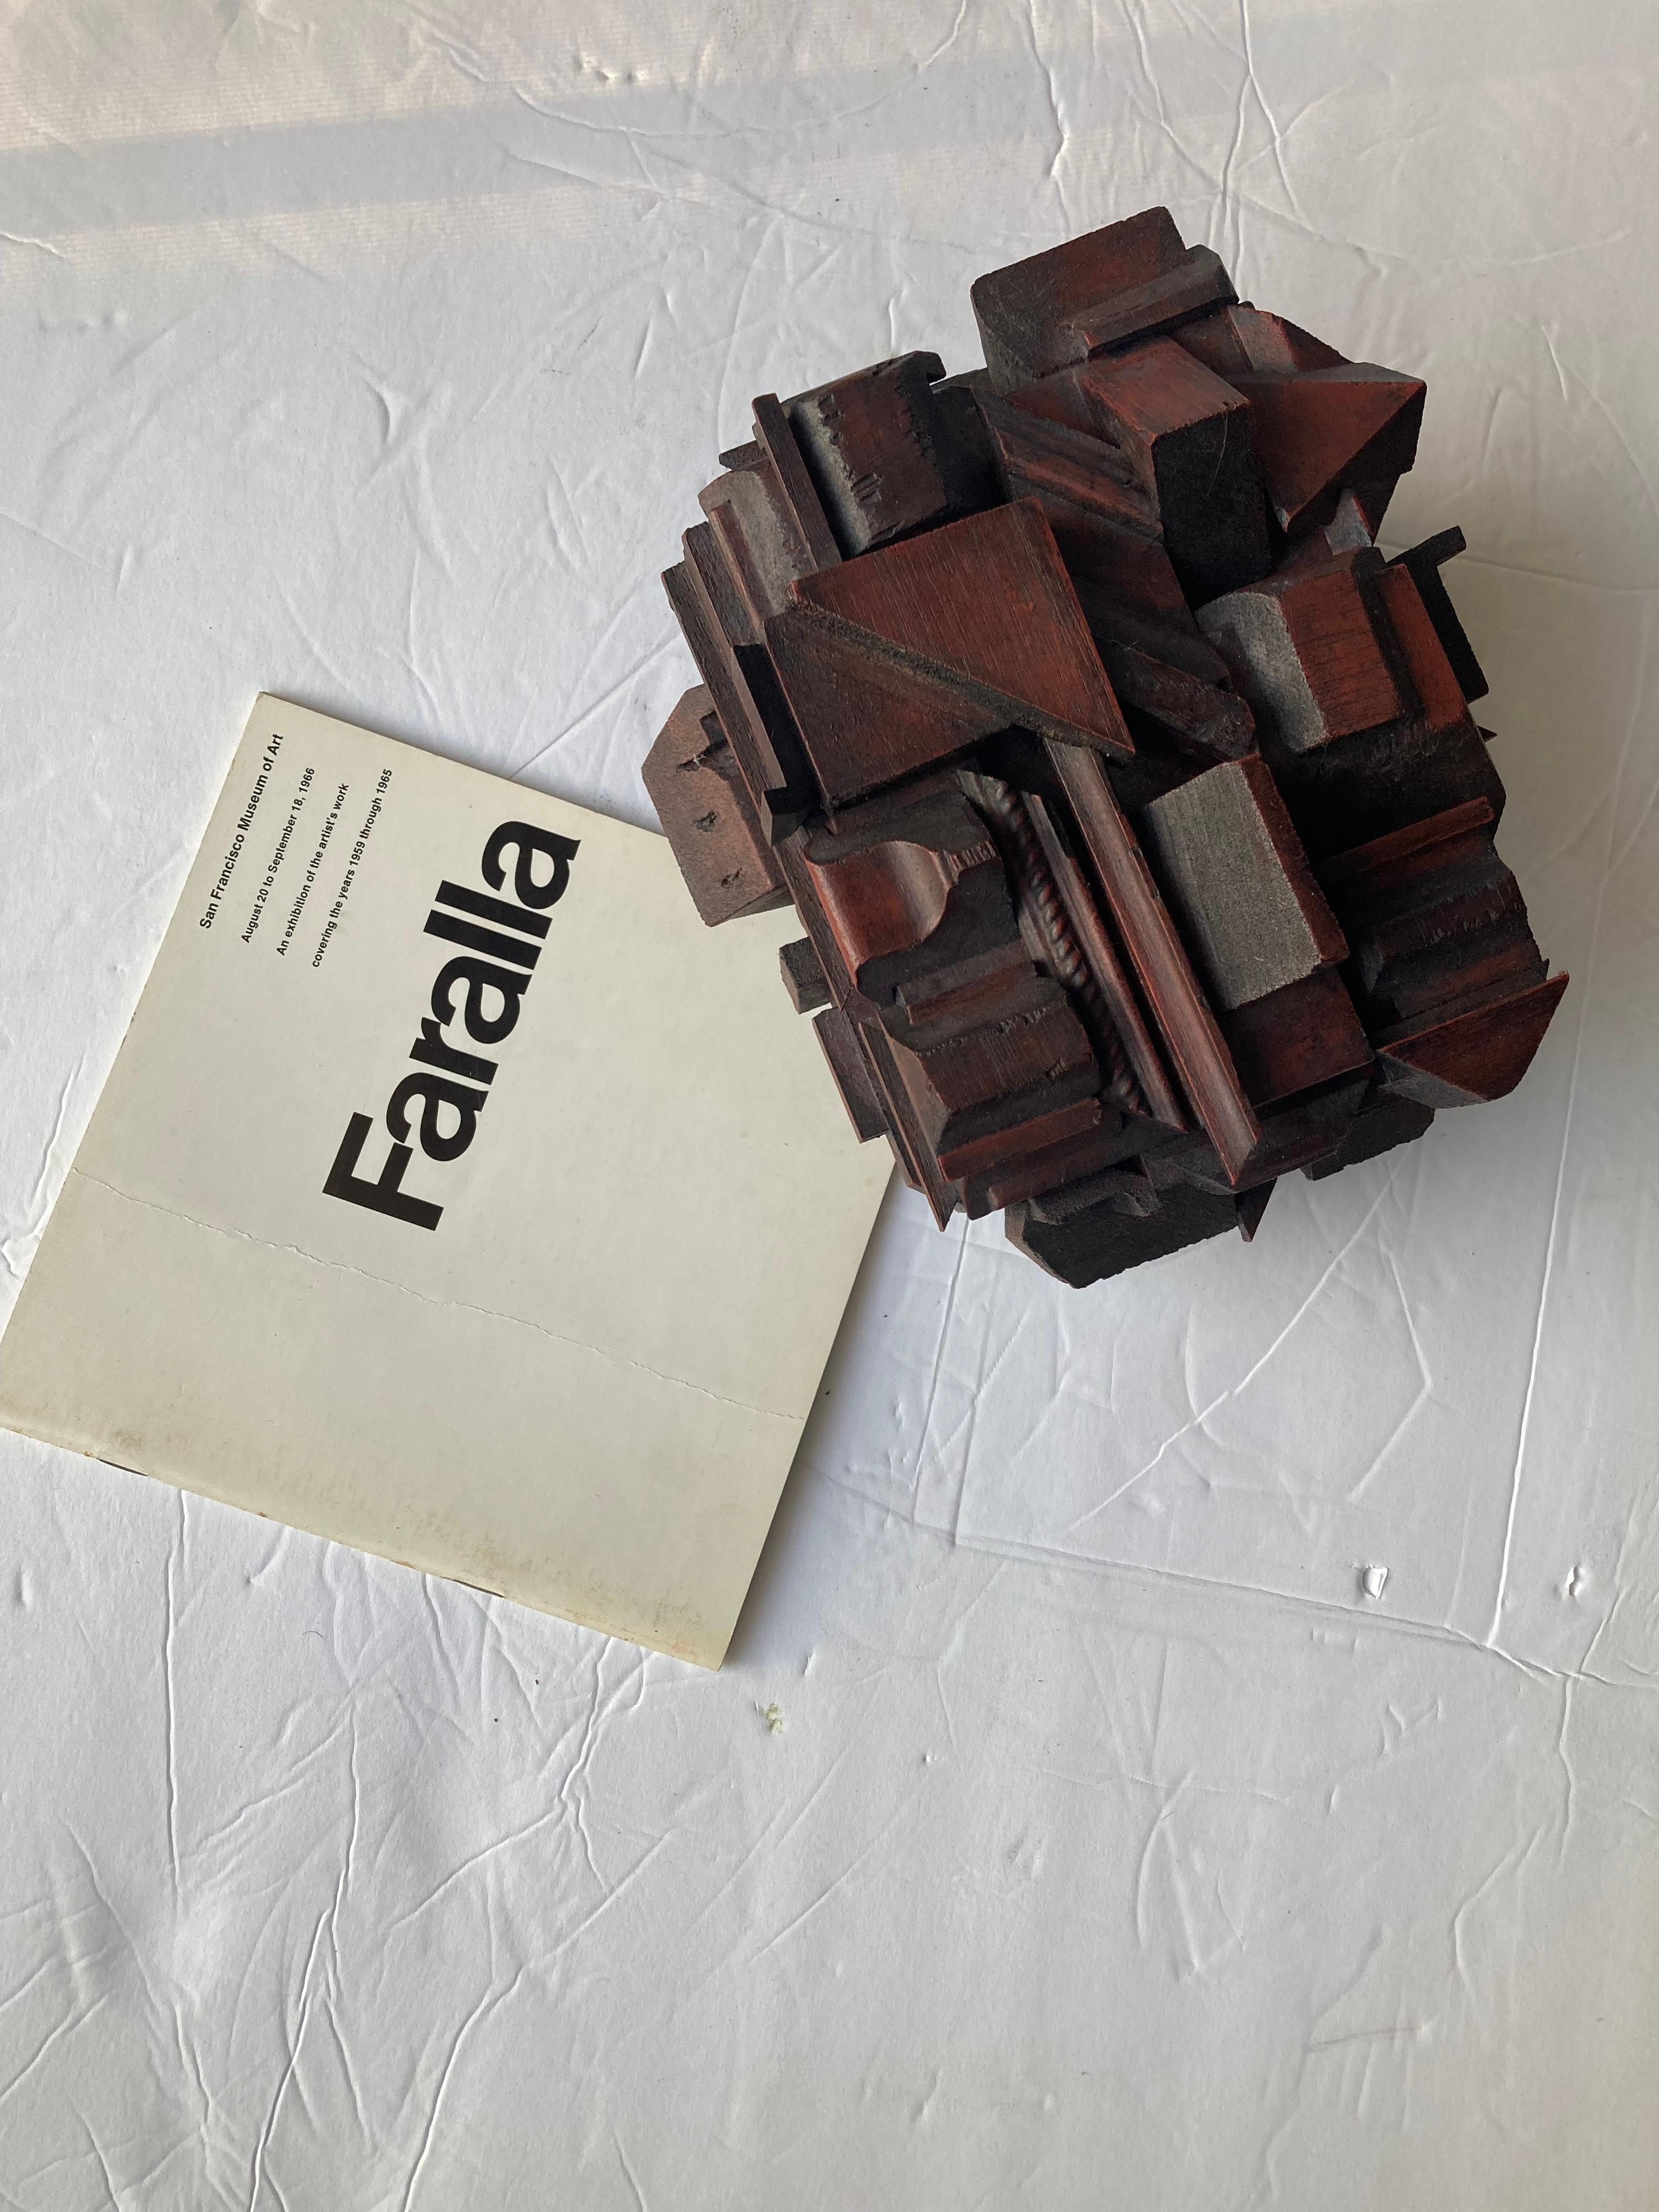 Hand-Crafted Richard Faralla, Wood Sculpture/ Jewelry Box, Dot of Exhibition 'F3' in Bottom